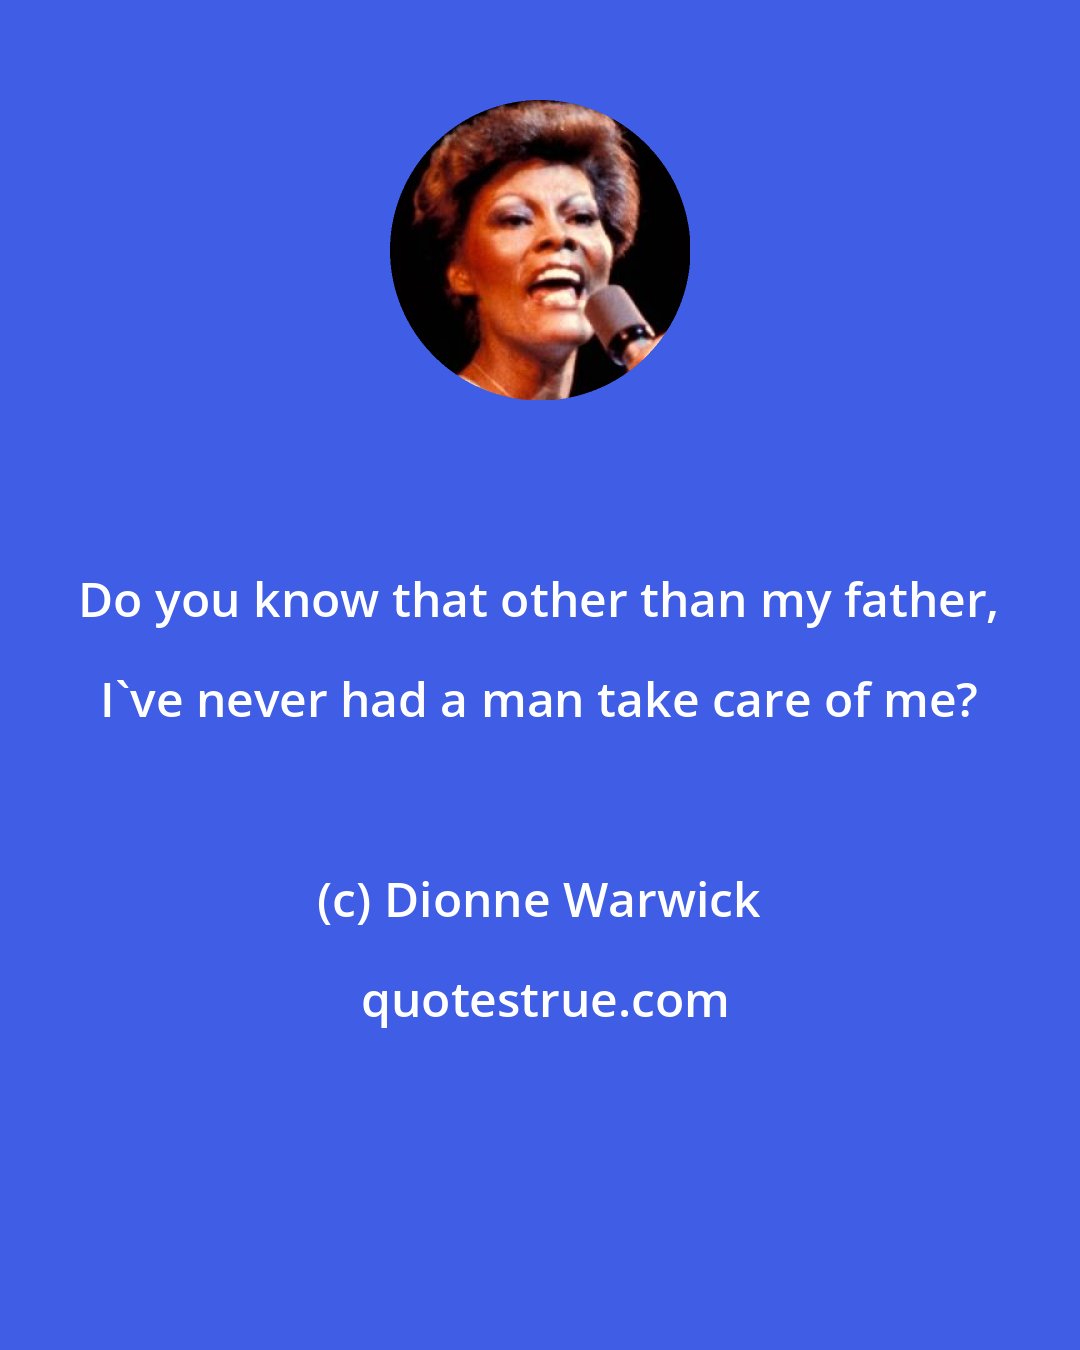 Dionne Warwick: Do you know that other than my father, I've never had a man take care of me?